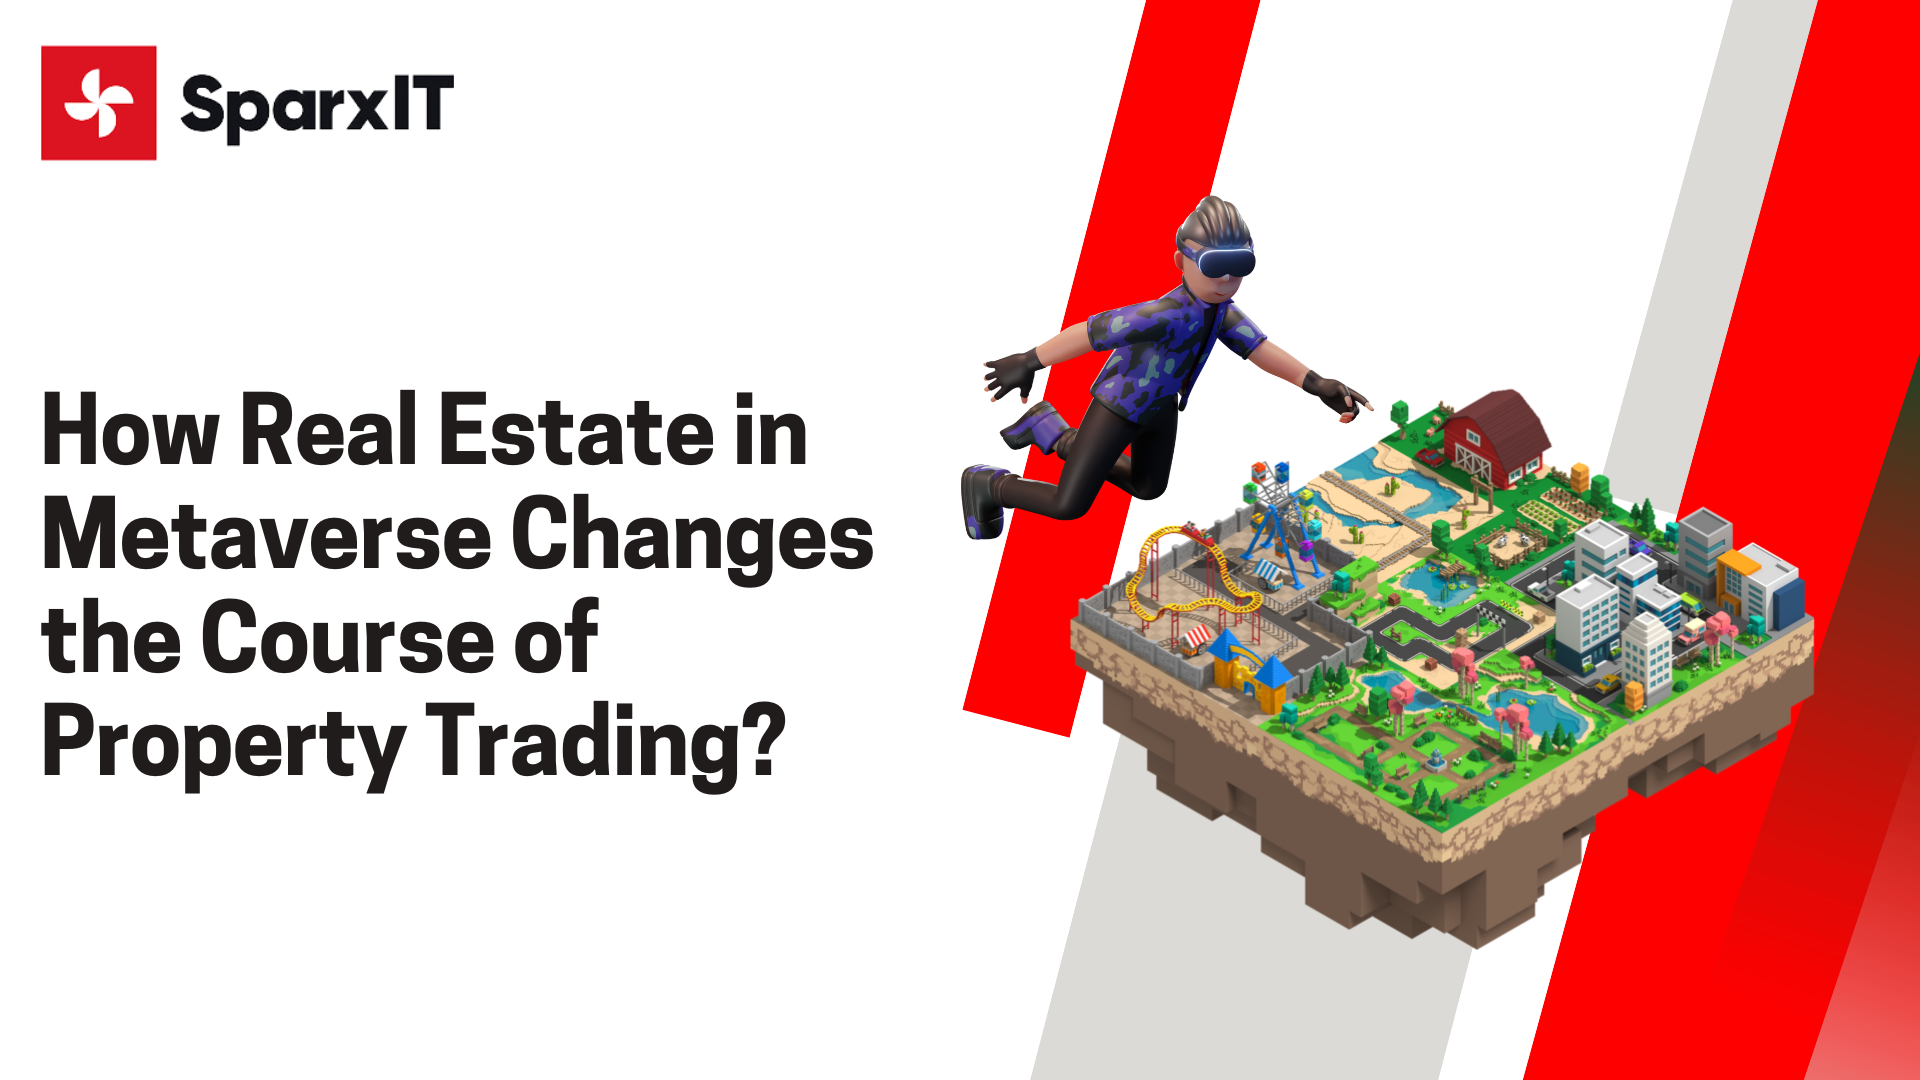 How Real Estate in Metaverse Changes the Course of Property Trading?